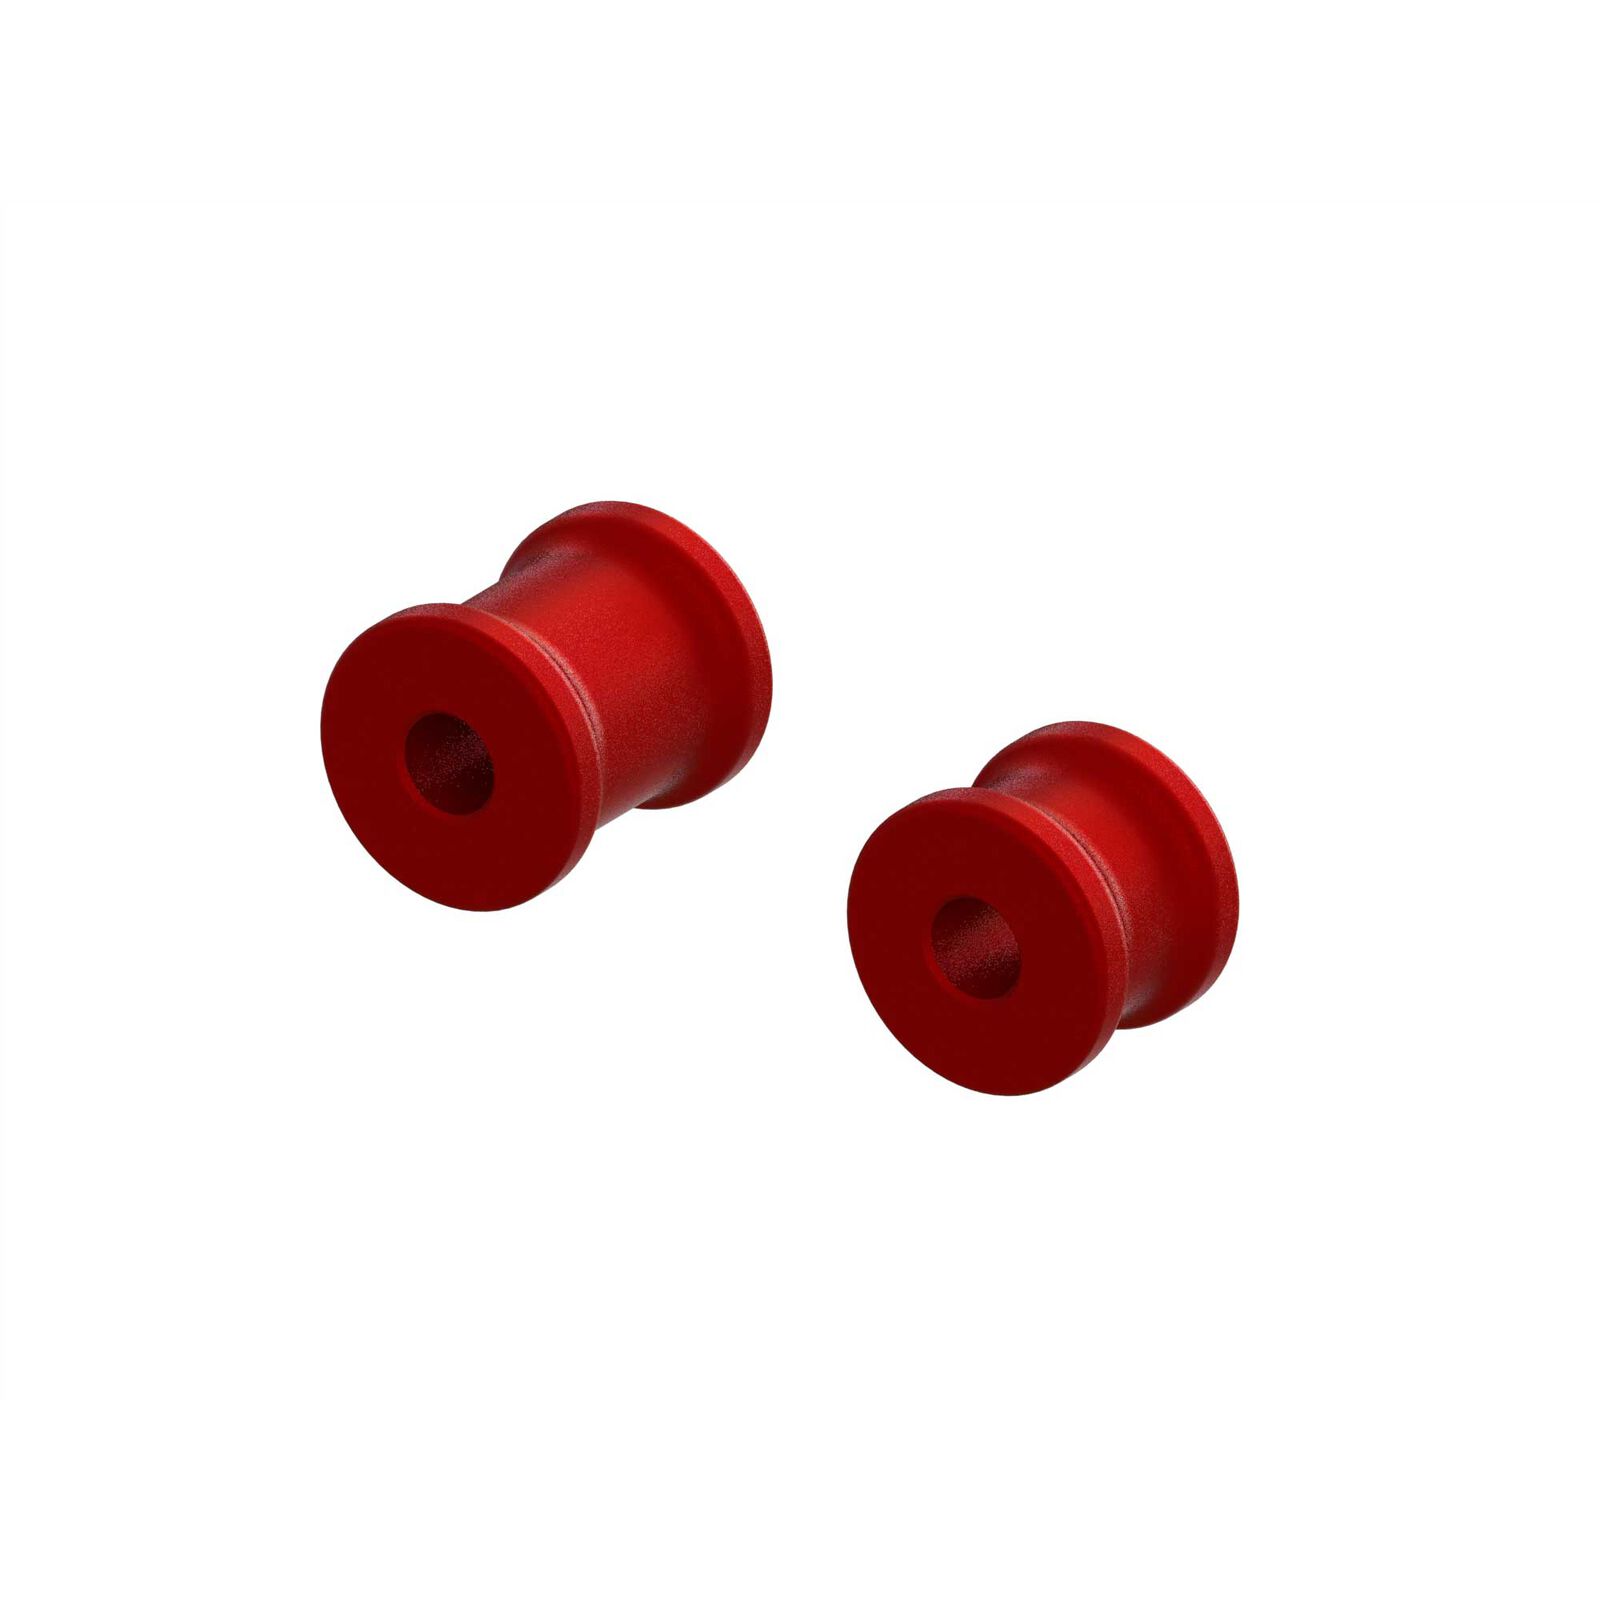 Aluminum Chassis Brace Spacer Set, Red: EXB